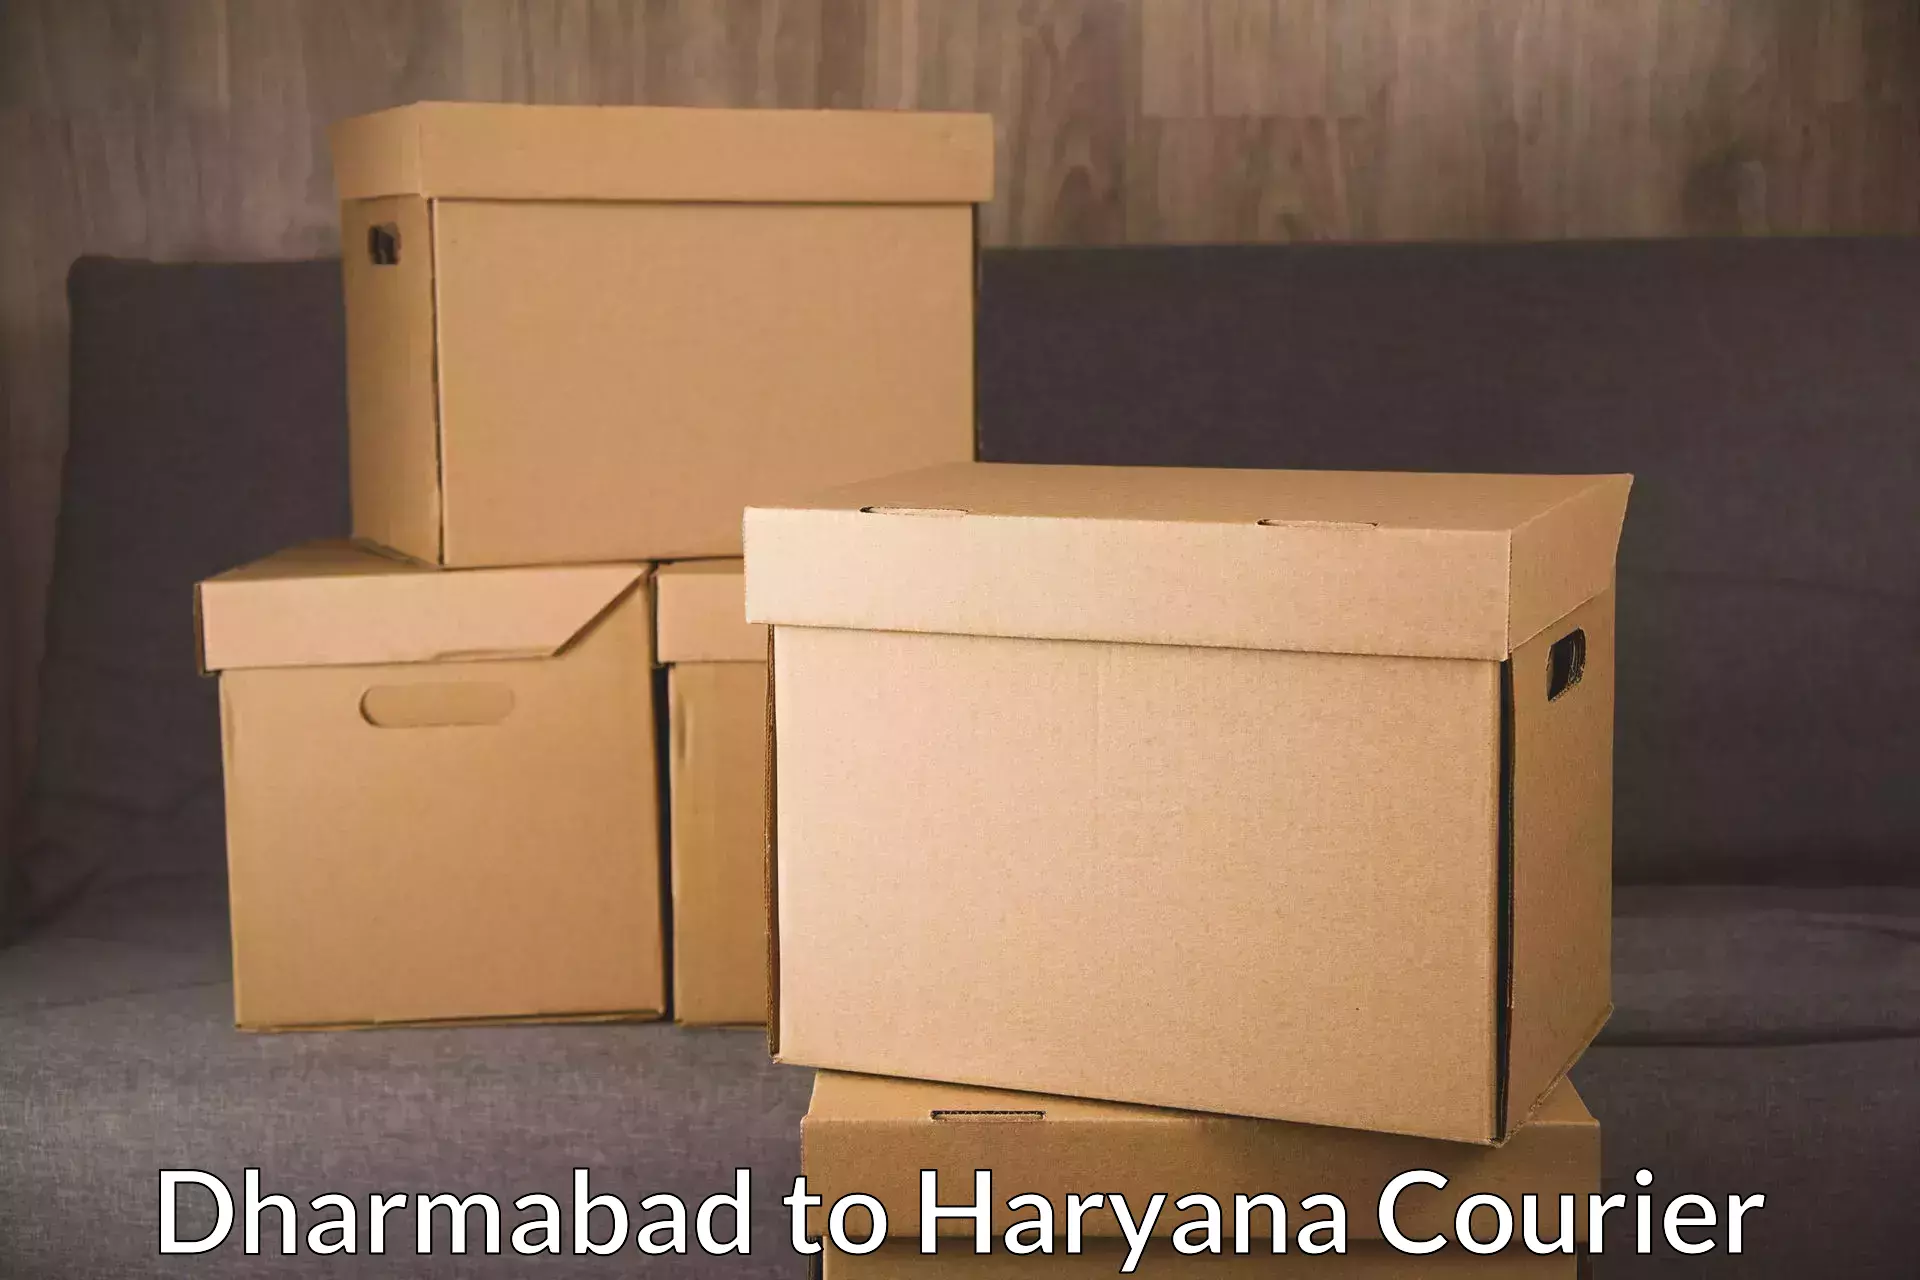 Courier service efficiency Dharmabad to Jhajjar